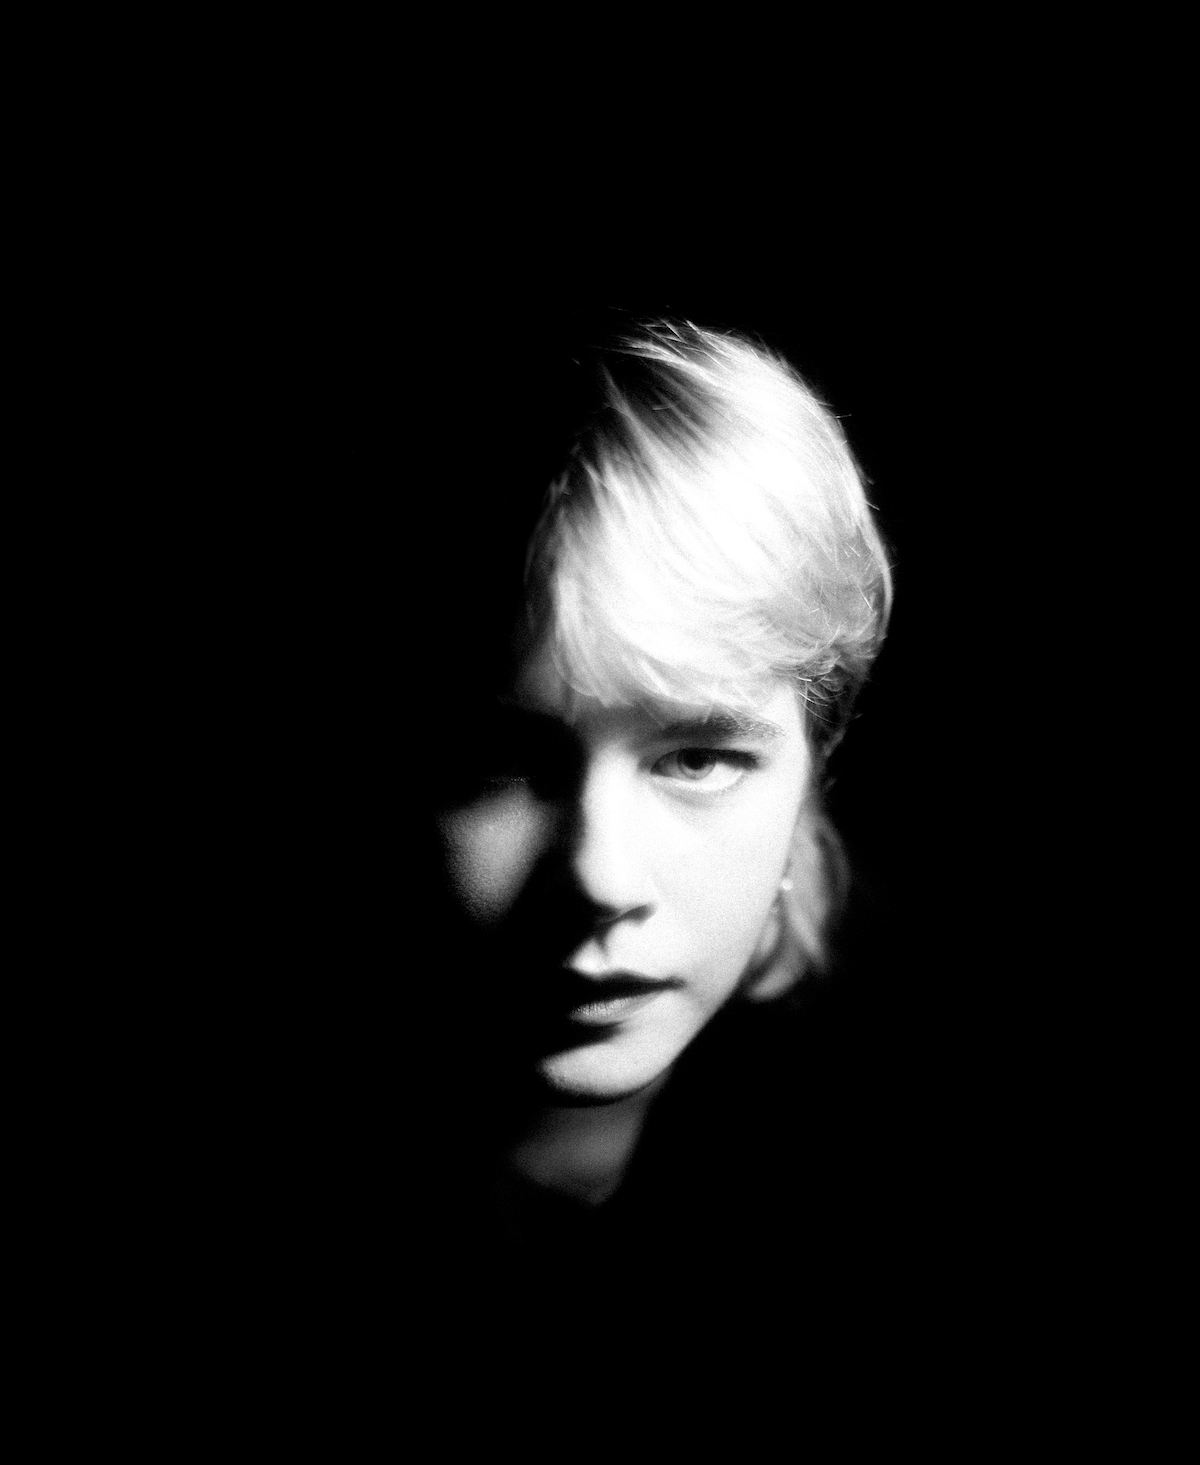 On a black-and-white picture, with a deep black background, the right half of Zaho de Sagazan's face is the most visible. A black shadow only hints at the left half. Her blond hair falls loosely into her forehead. She looks into the camera.